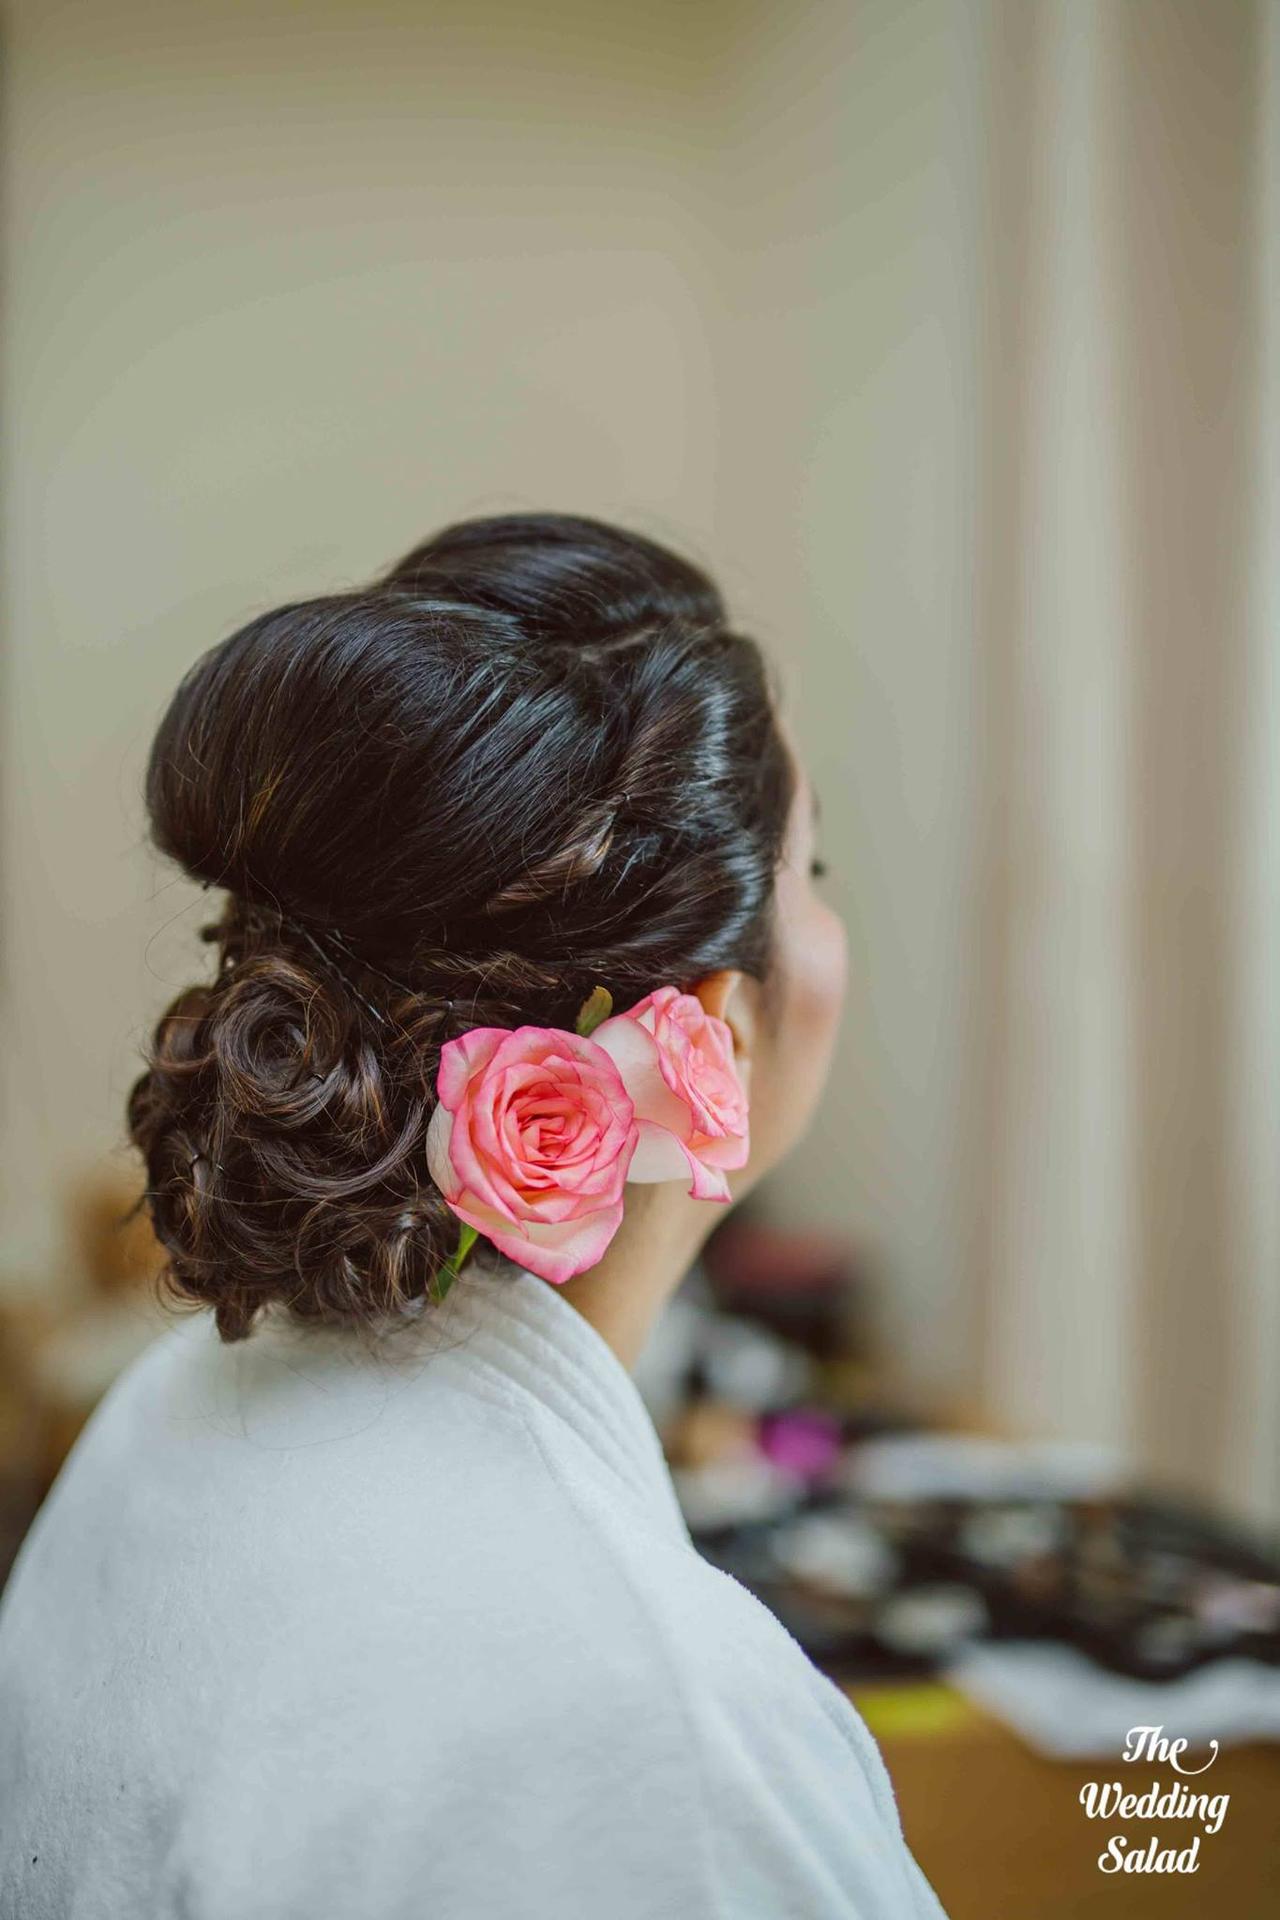 Hairstyle Ideas For The Brides Who Love Wearing Roses | Threads - WeRIndia